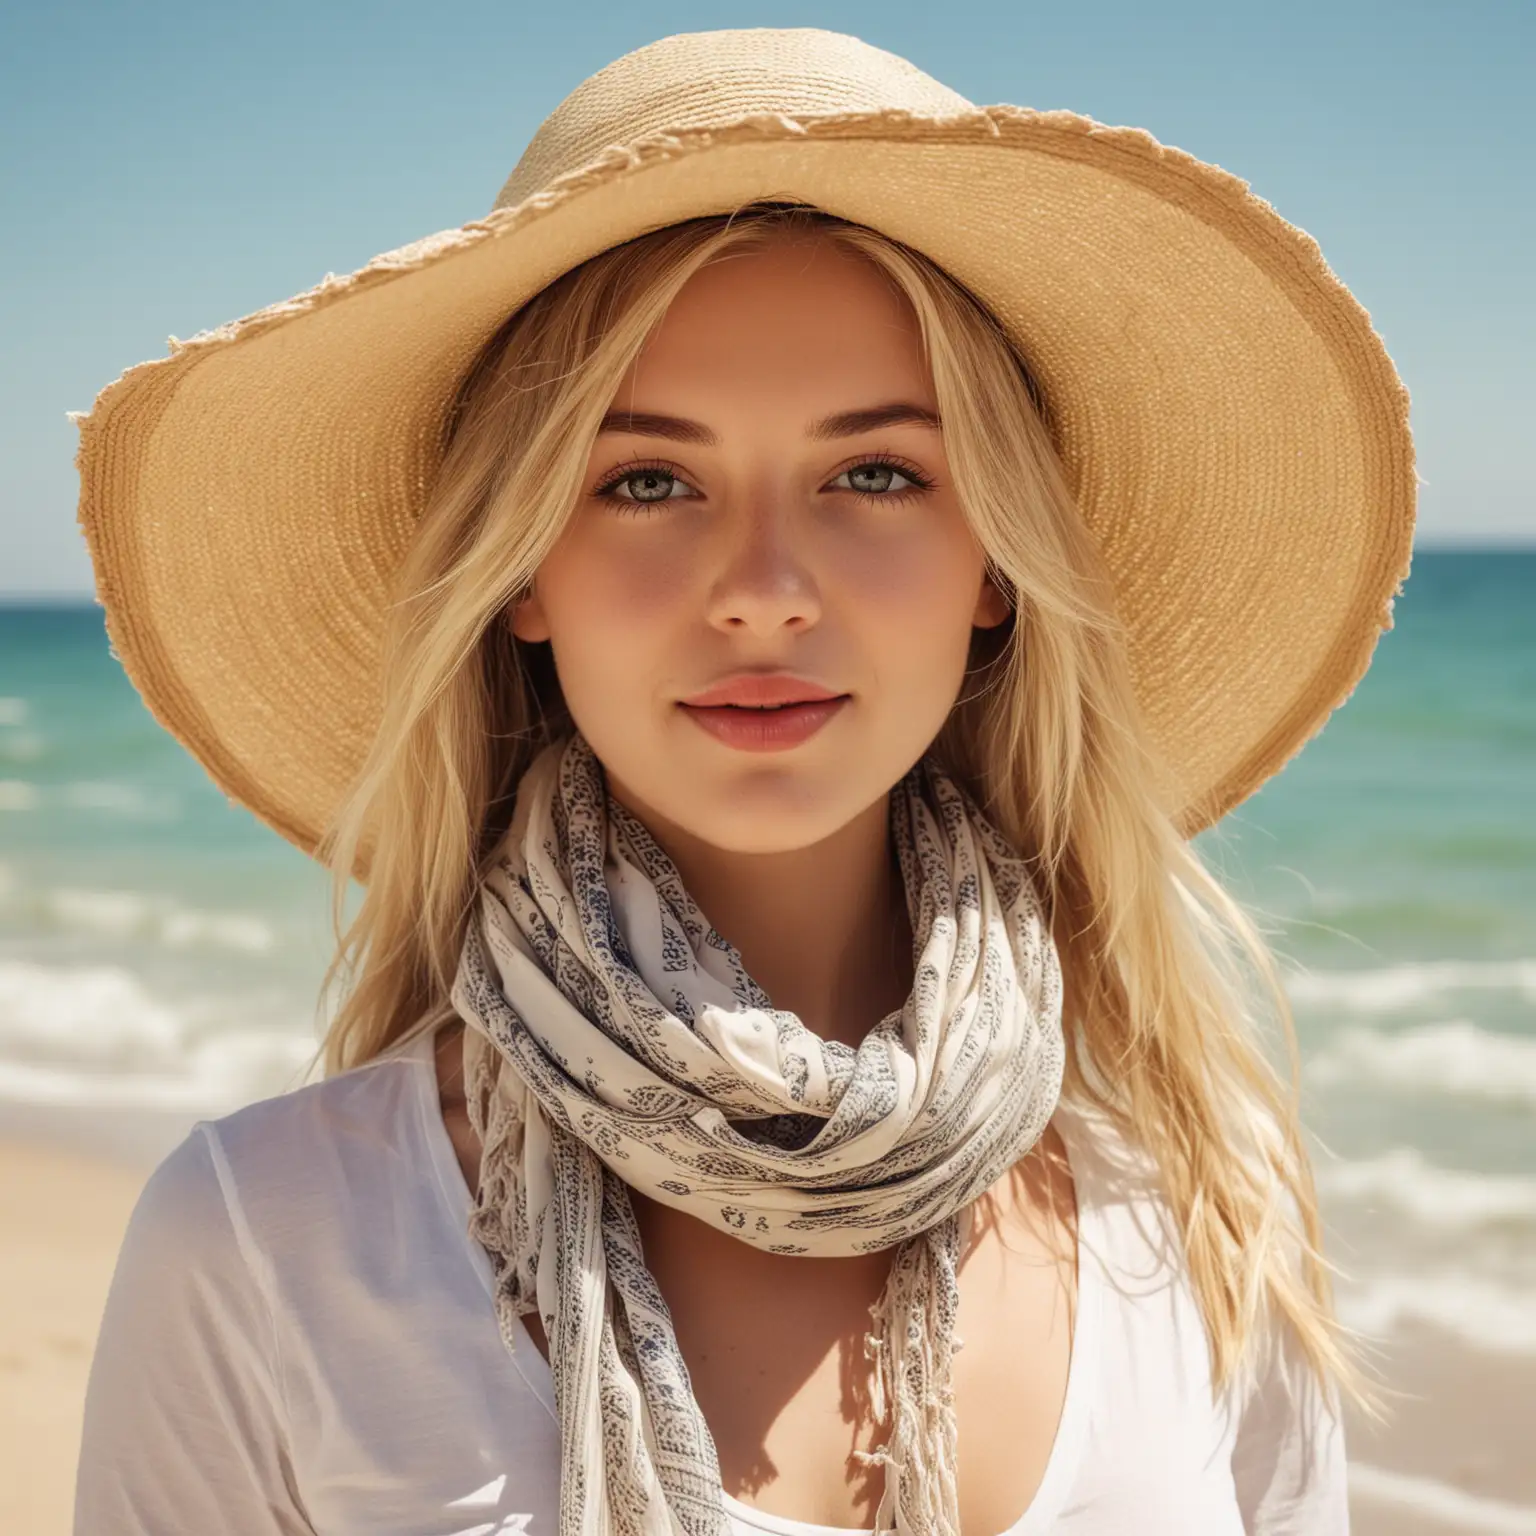 shiny summer day, lady with open hair, blonde, hat, scarf, beach